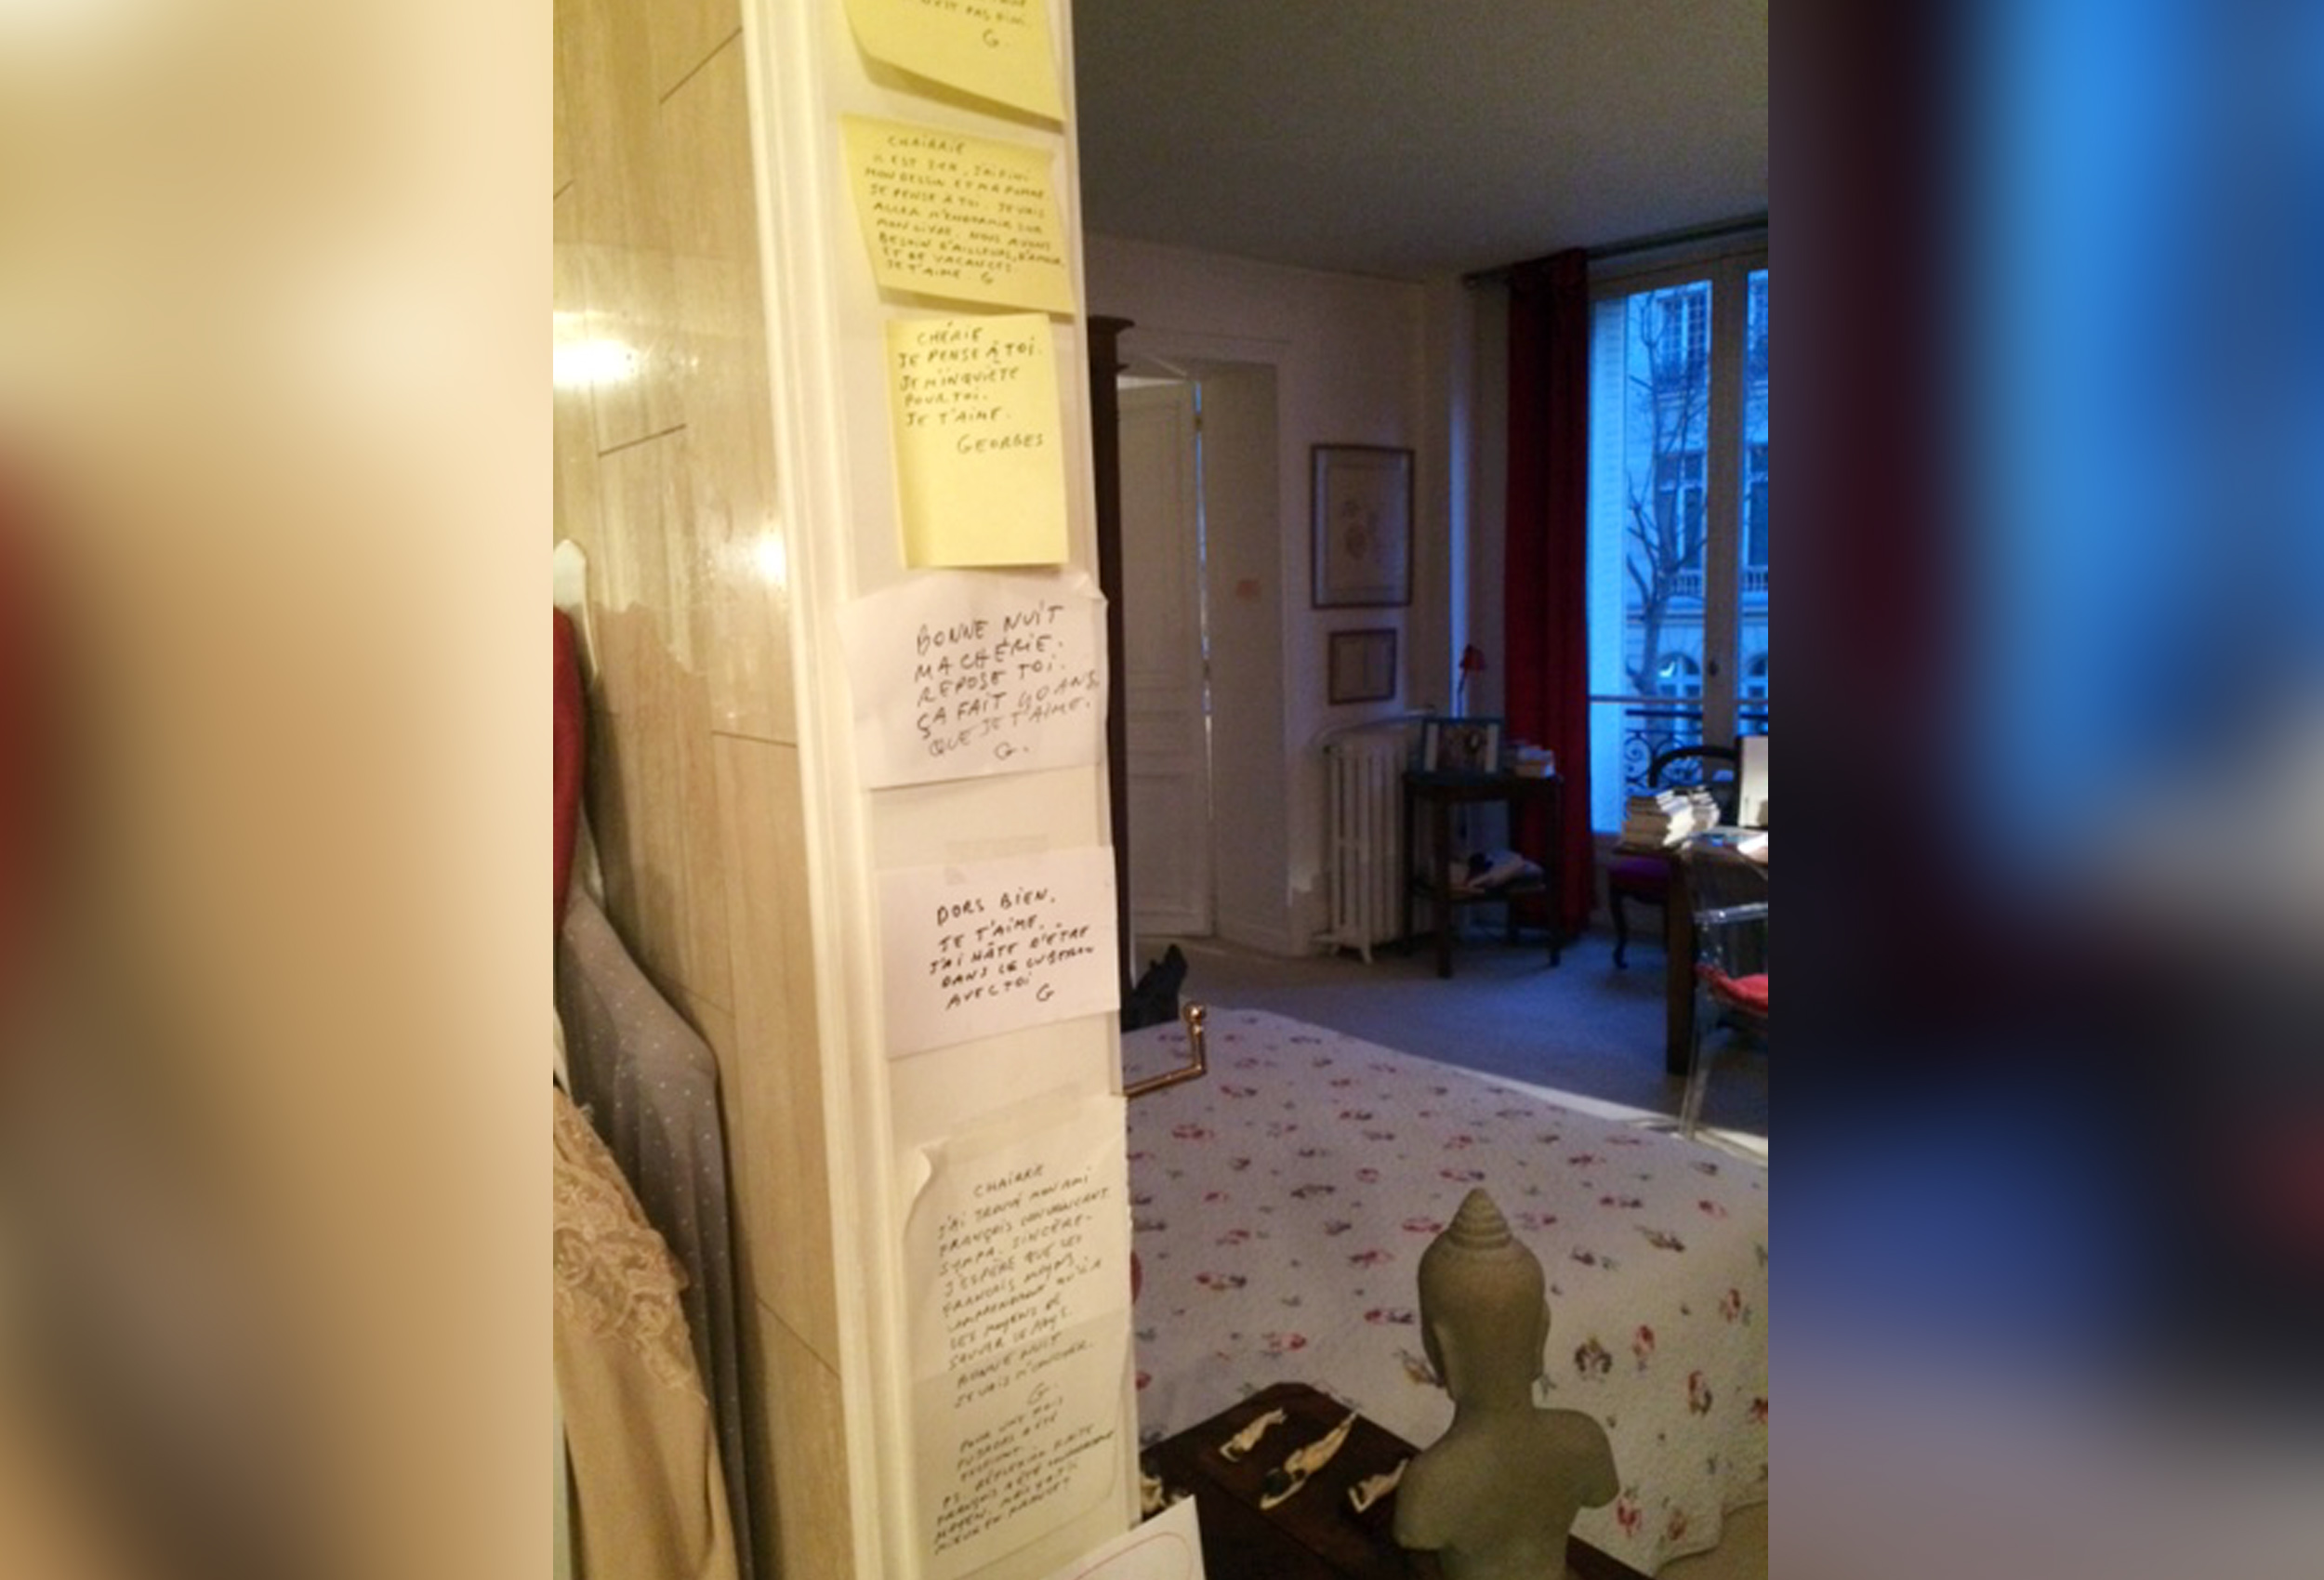 PHOTO: Hundreds of post-it notes written by Georges Wolinski are scattered through the apartment that he shared with his partner of 47 years, Maryse Wolinski, before his death in the Charlie Hebdo massacre on Jan. 7, 2015.